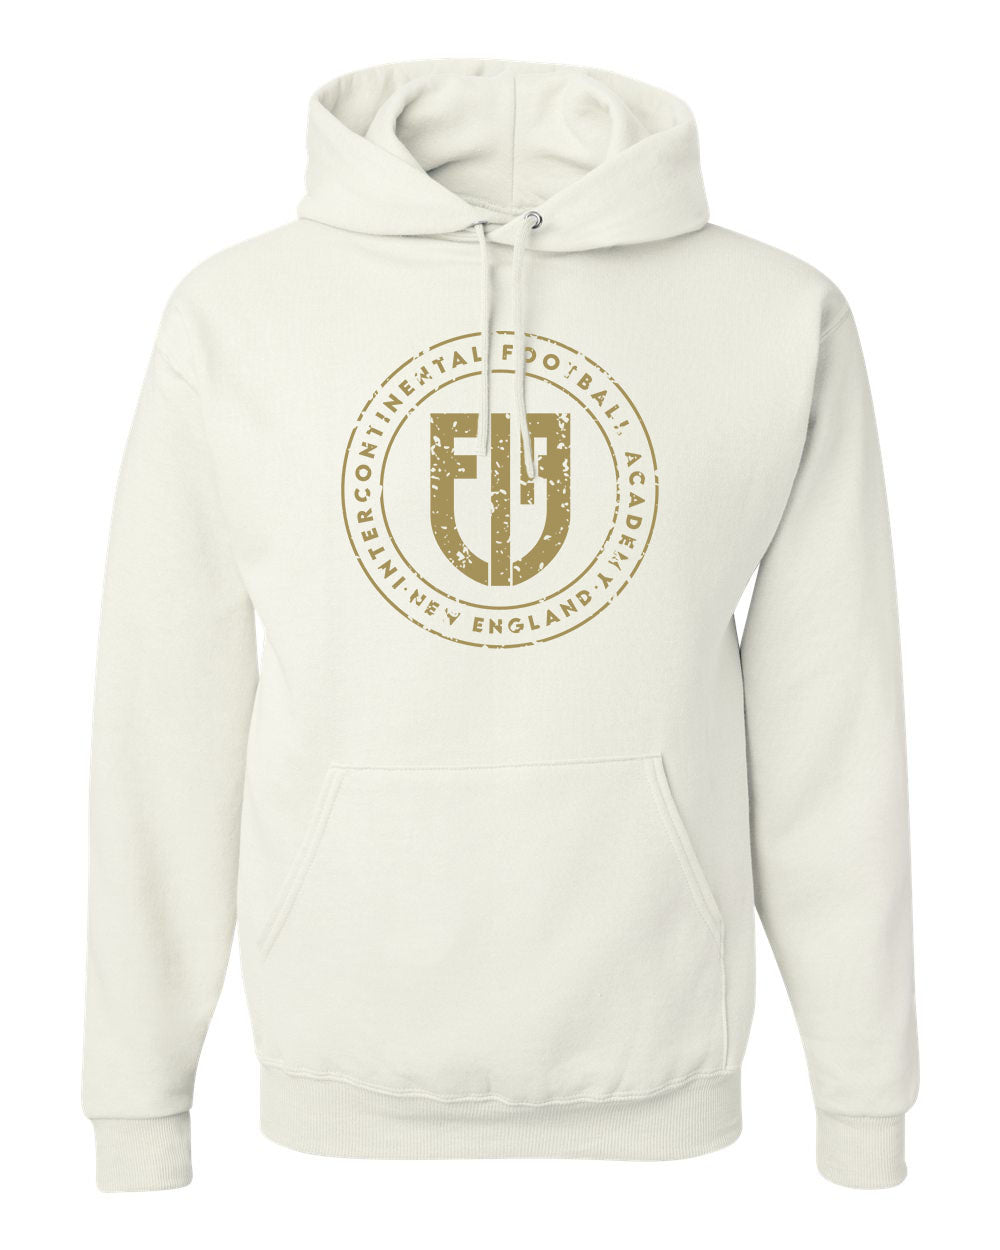 IFA Adult Hoodie "Grunge"  - 996m (color options available)